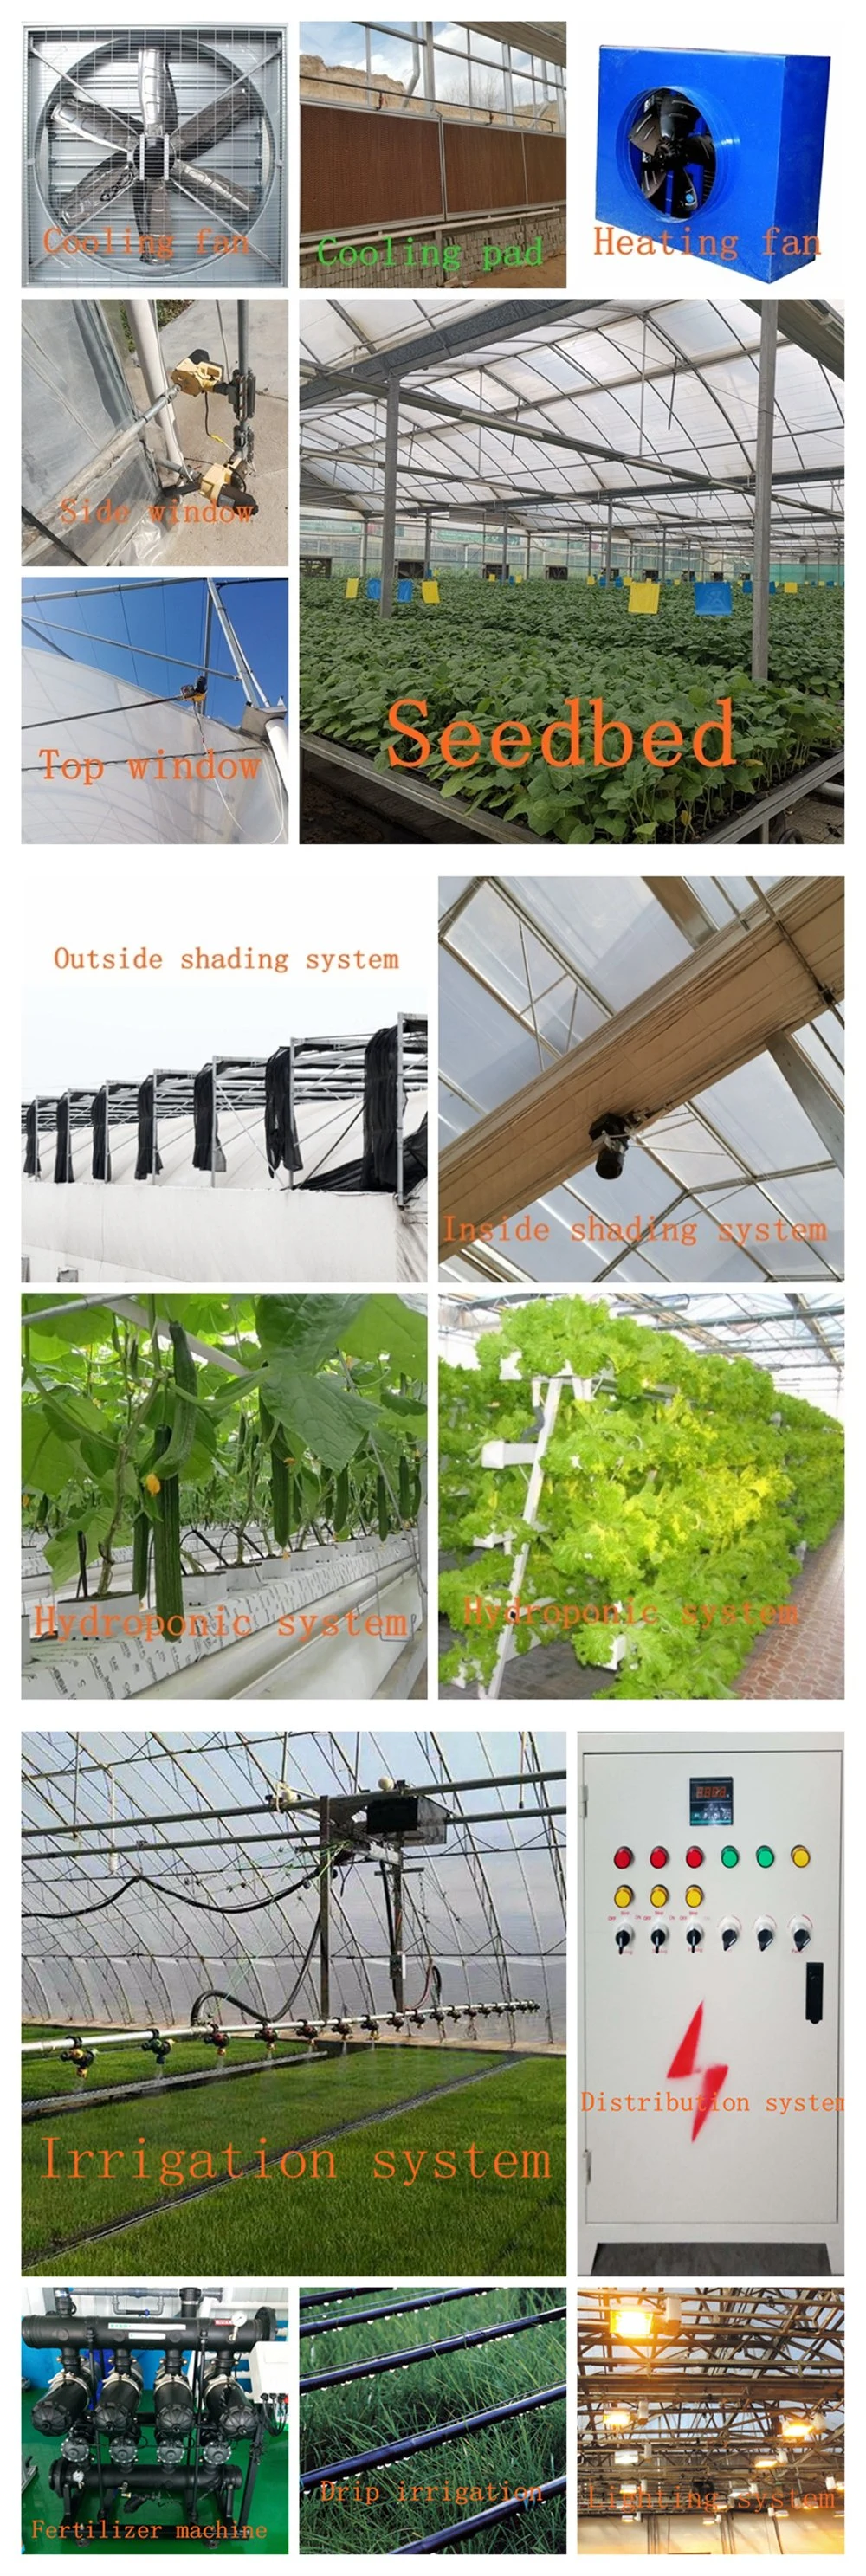 Multi-Span Film Commercial/Agriculture Greenhouse with Heating/Hydroponic System for Tomato/Salad/Cucumber/Flower/Lettuce